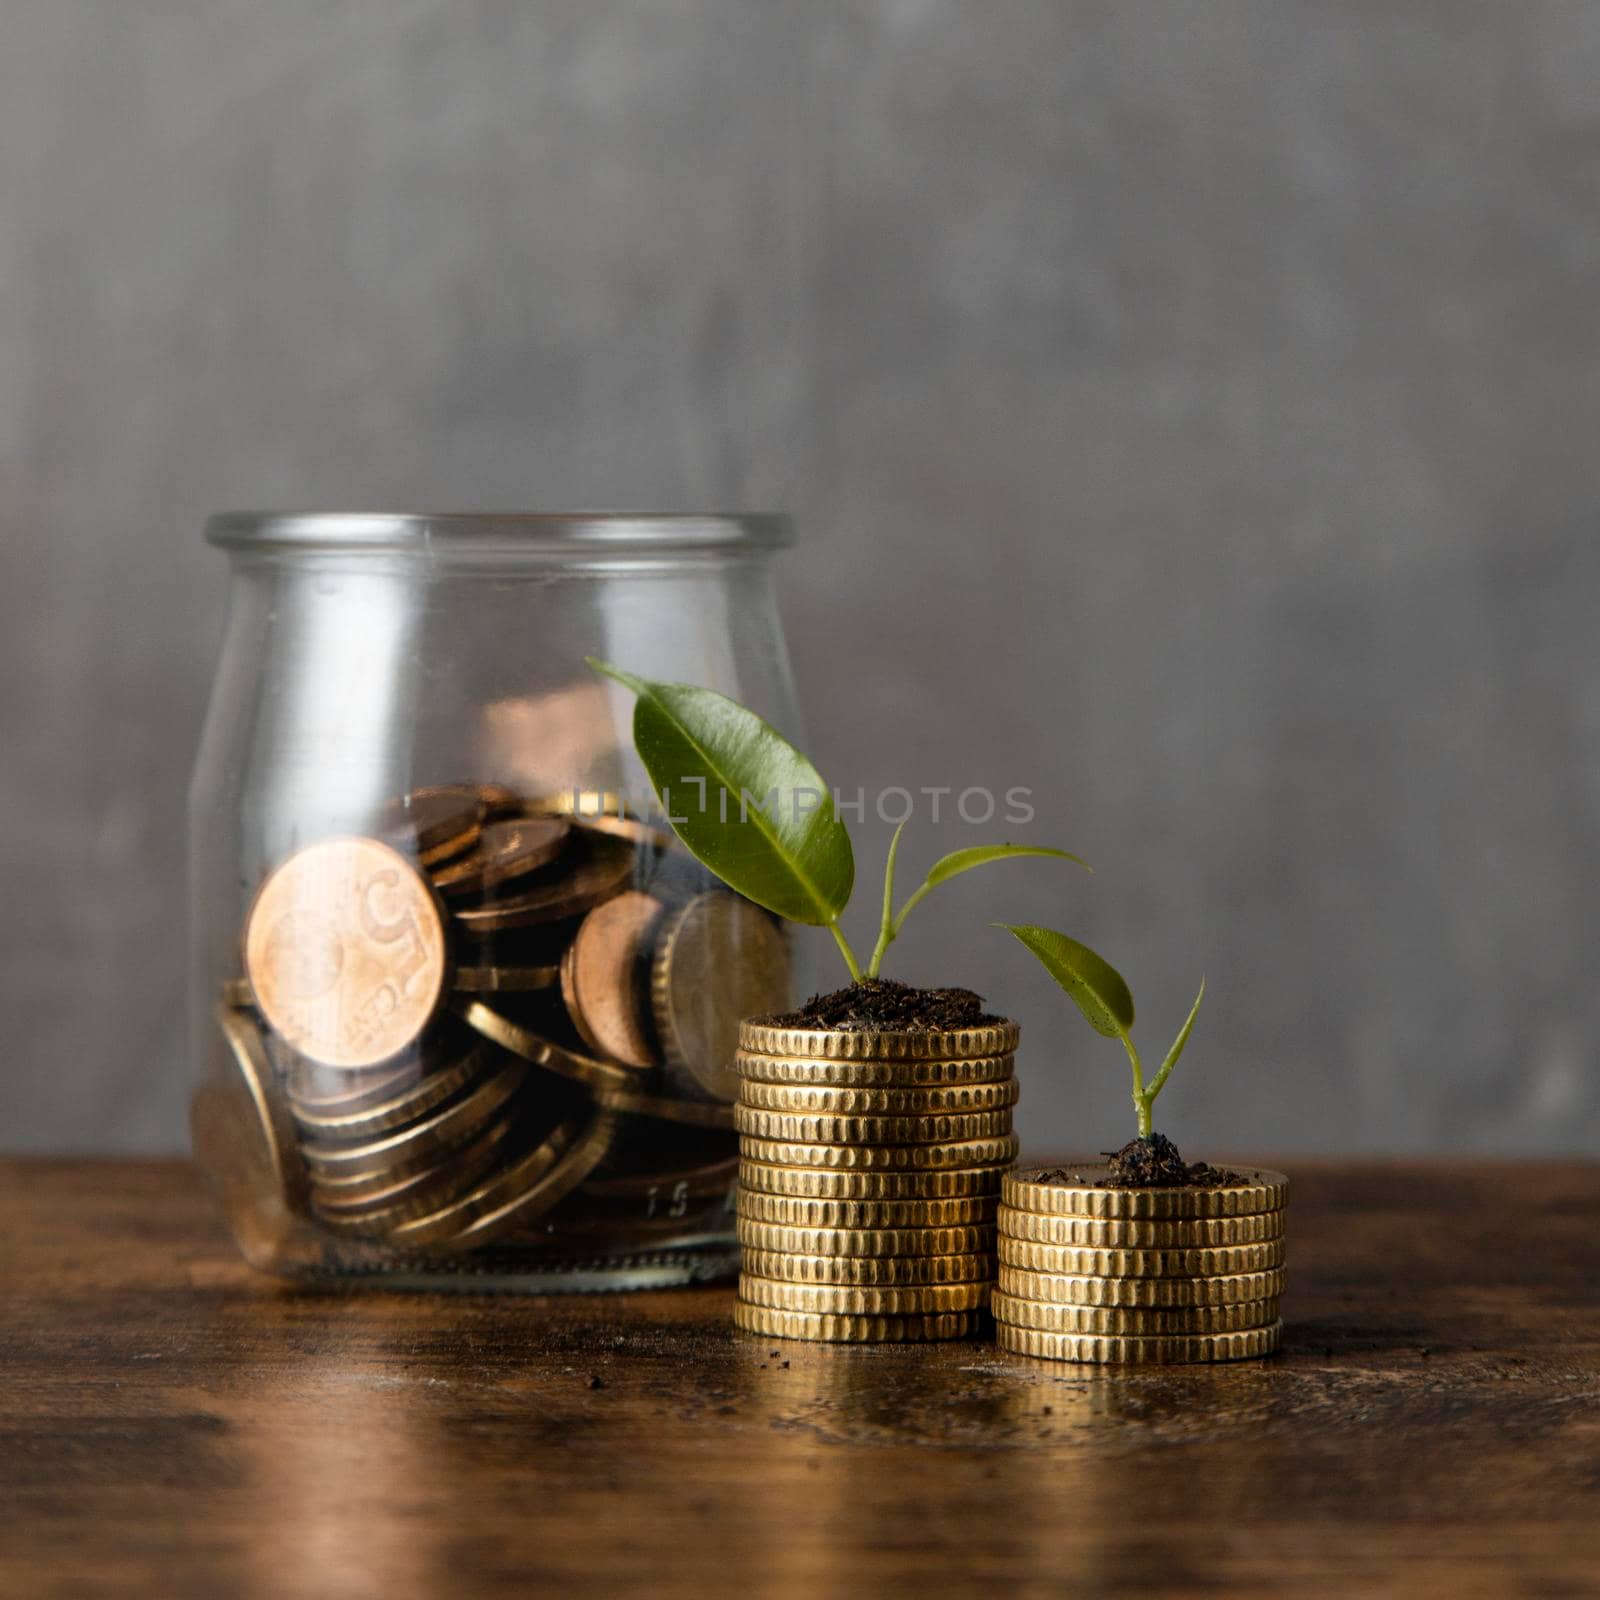 front view two stacks coins with plants jar. High quality photo by Zahard